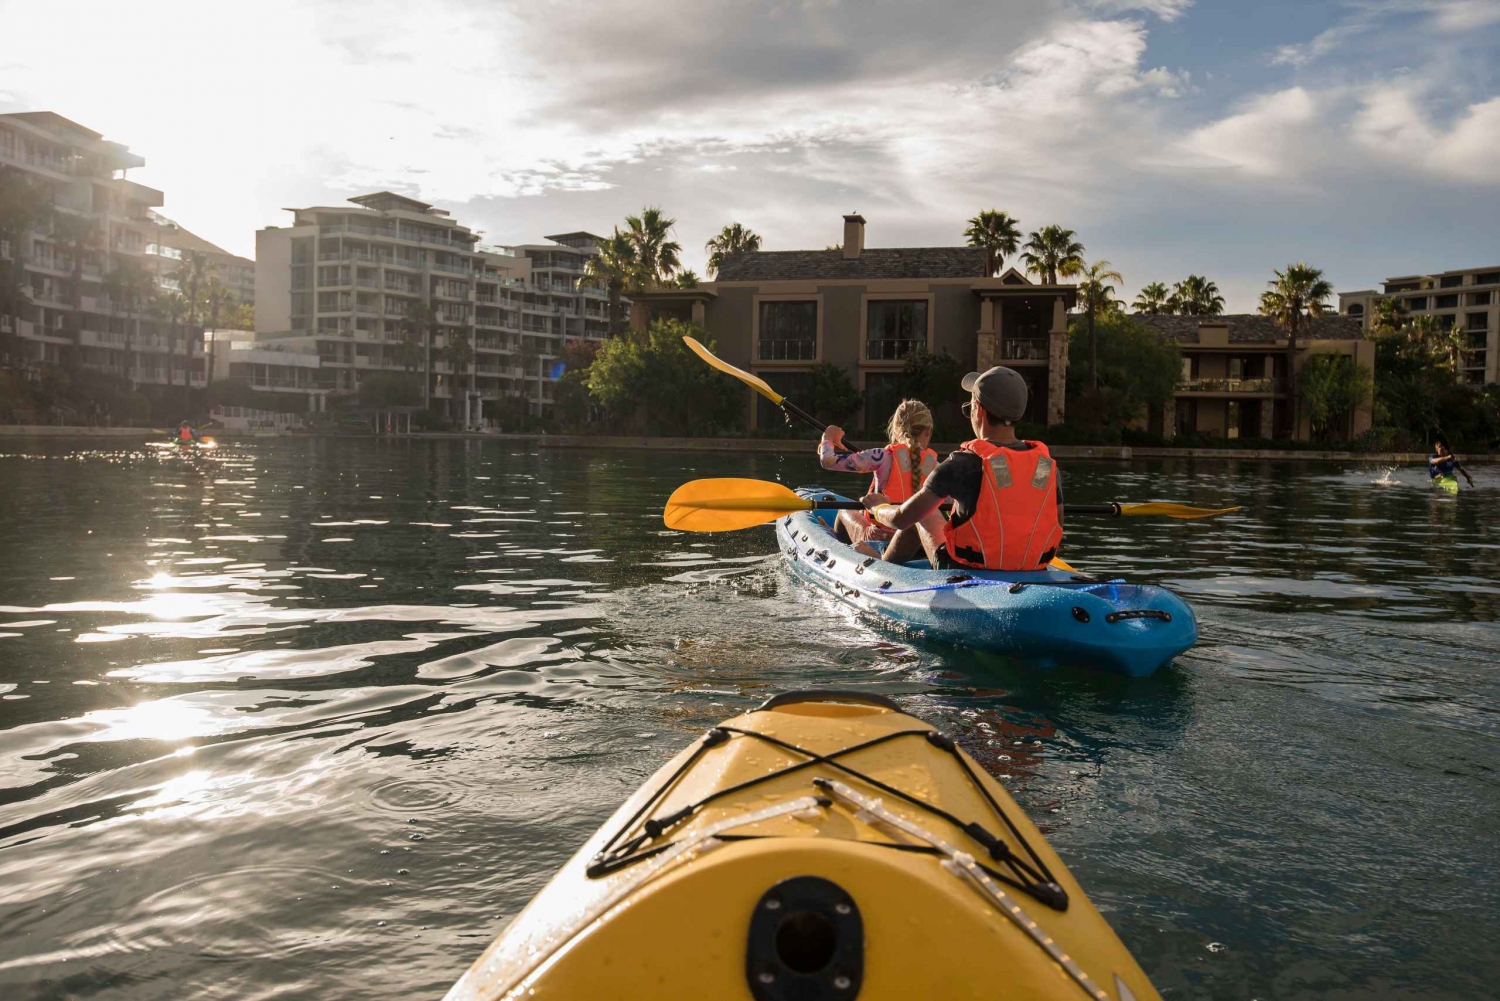 Cape Town: Day or Night Guided Kayak Tour in Battery Park